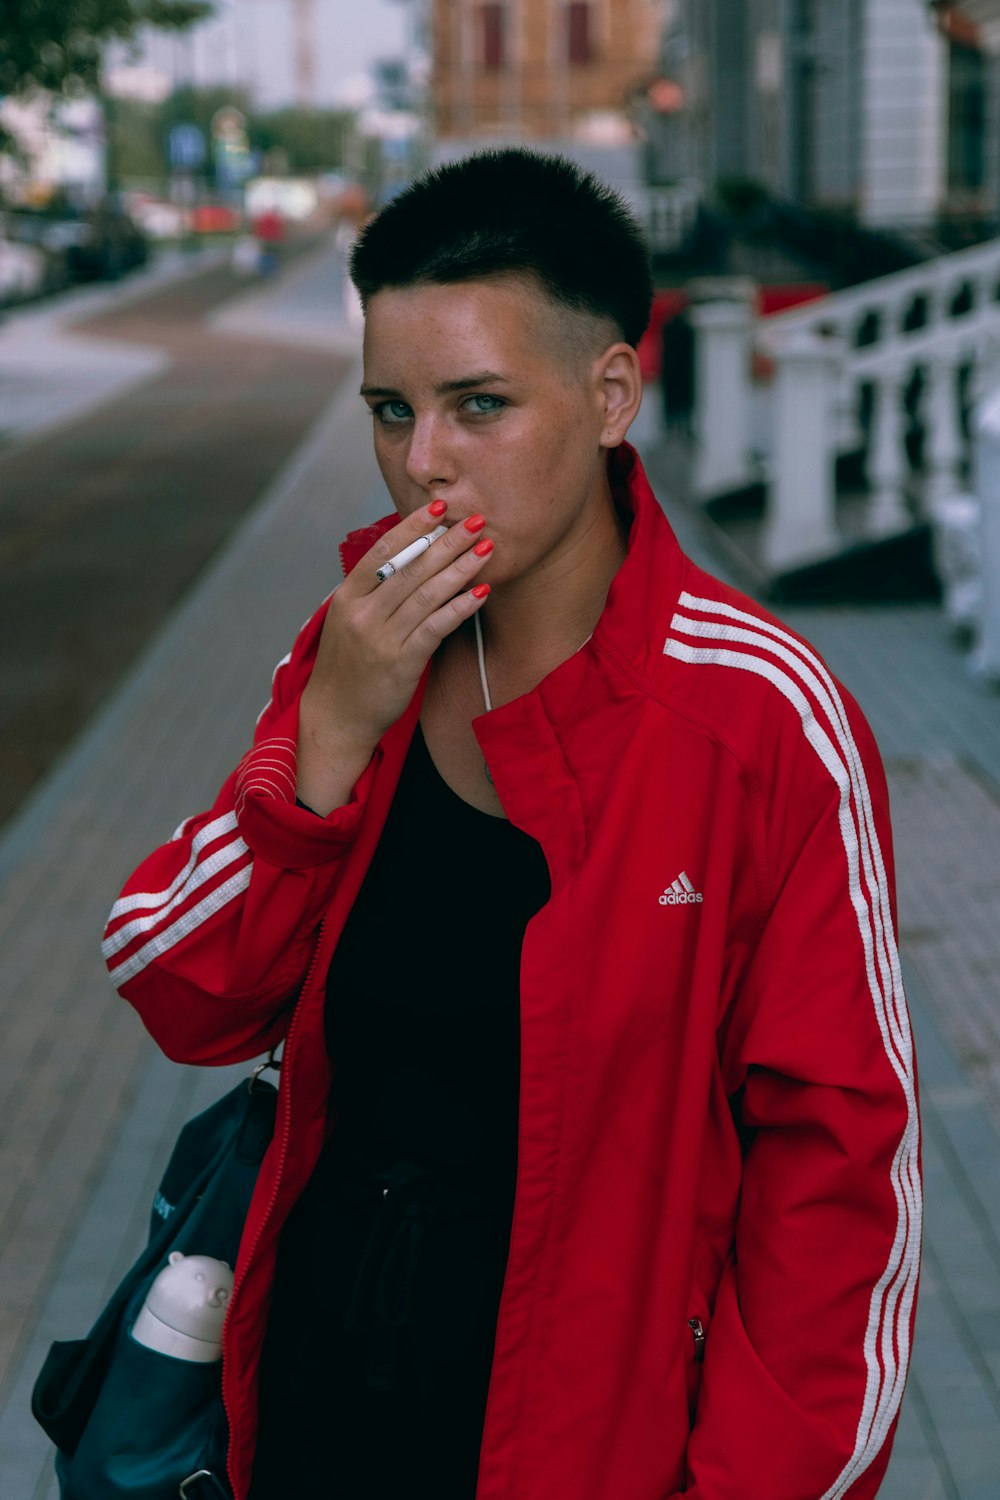 man in red and white adidas zip up jacket